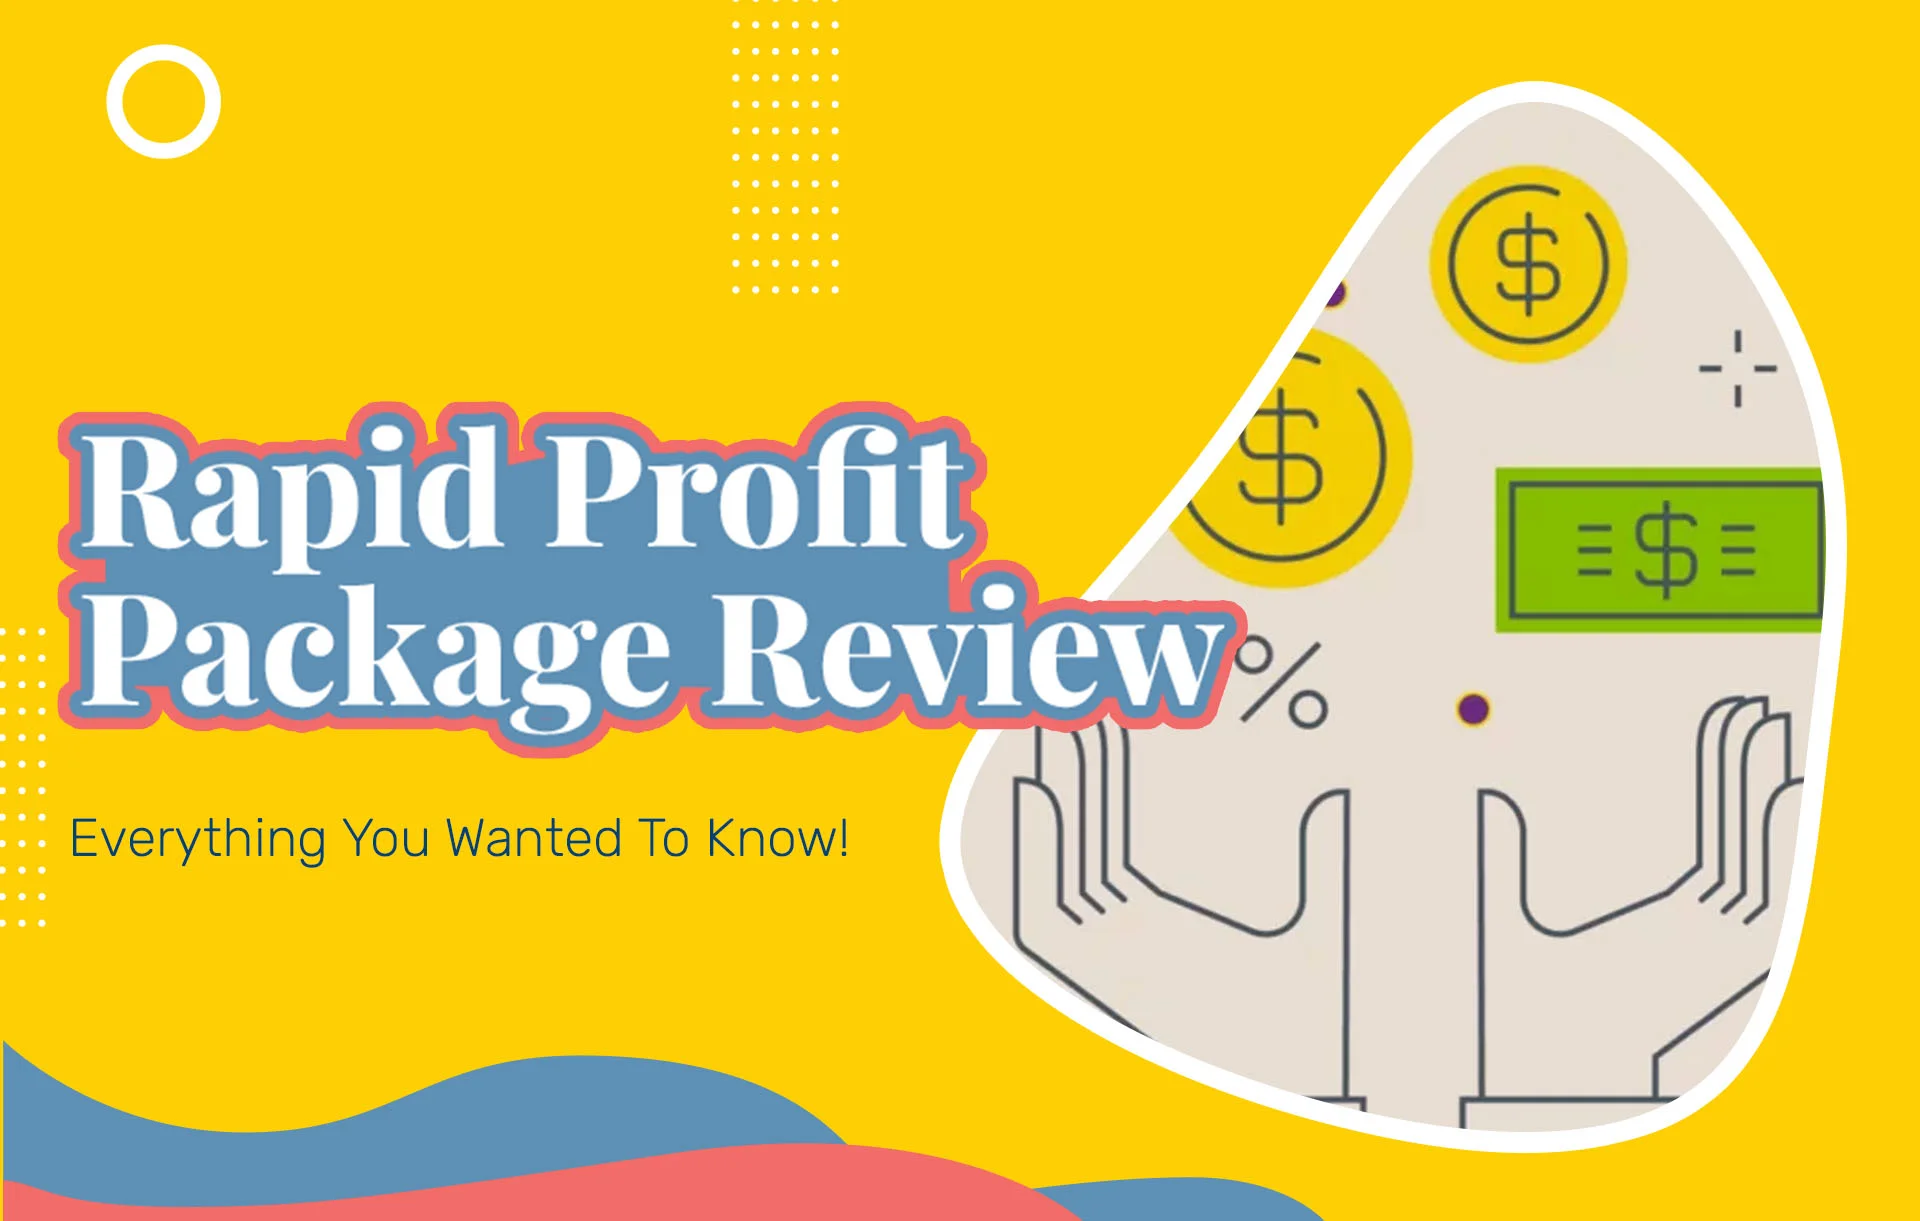 Rapid Profit Package Reviews: Everything You Wanted To Know!